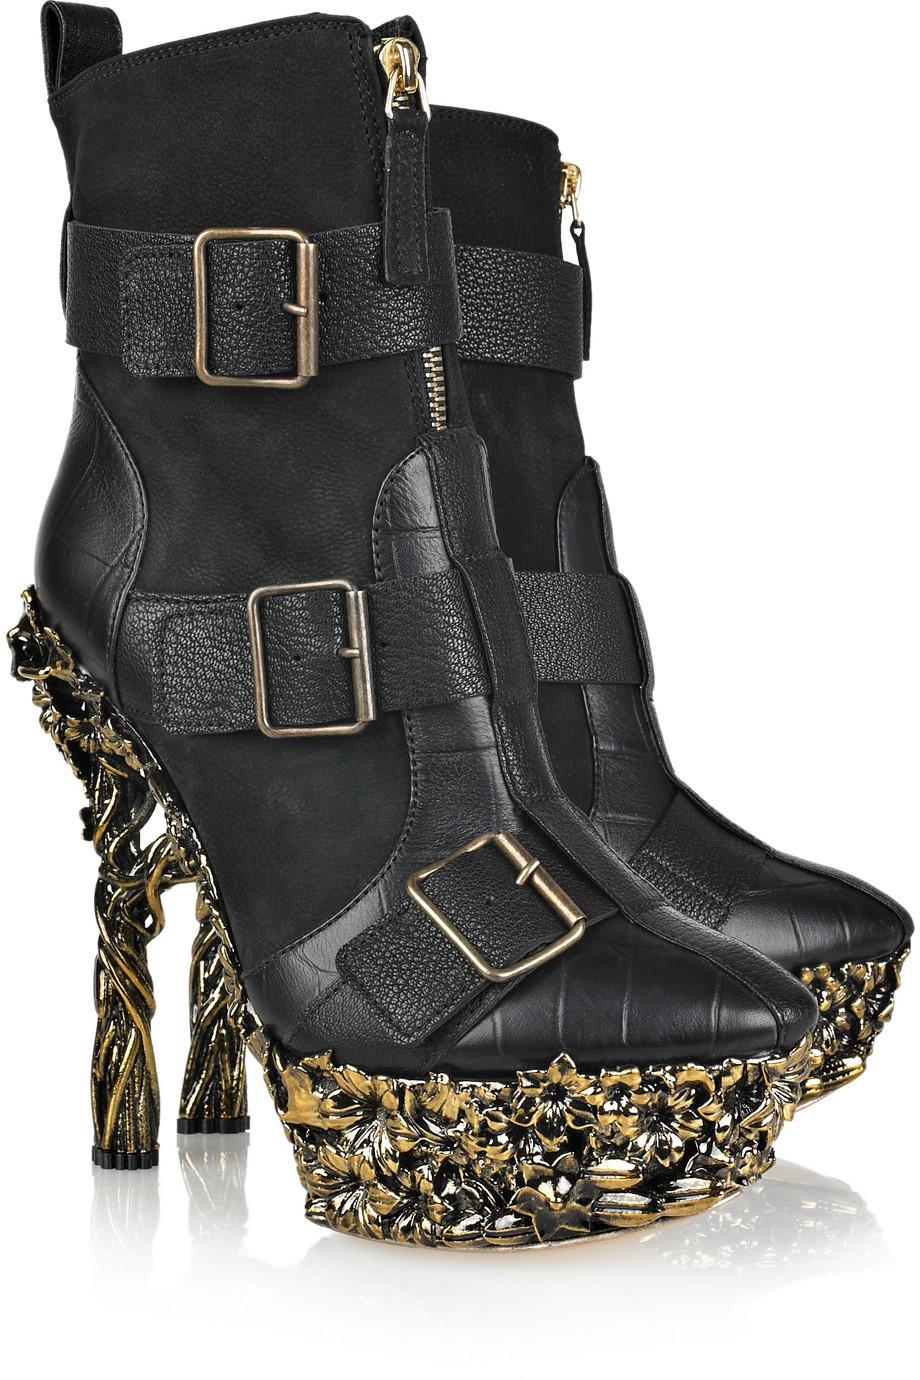 2010 ALEXANDER MCQUEEN Floral-engraved leather boots

Black leather platform boots with a gold floral-engraved heel that measures approximately 150mm/ 6 inches with a 40mm/ 1.5 inch platform. They have a pointed toe, contrasting textured-leather